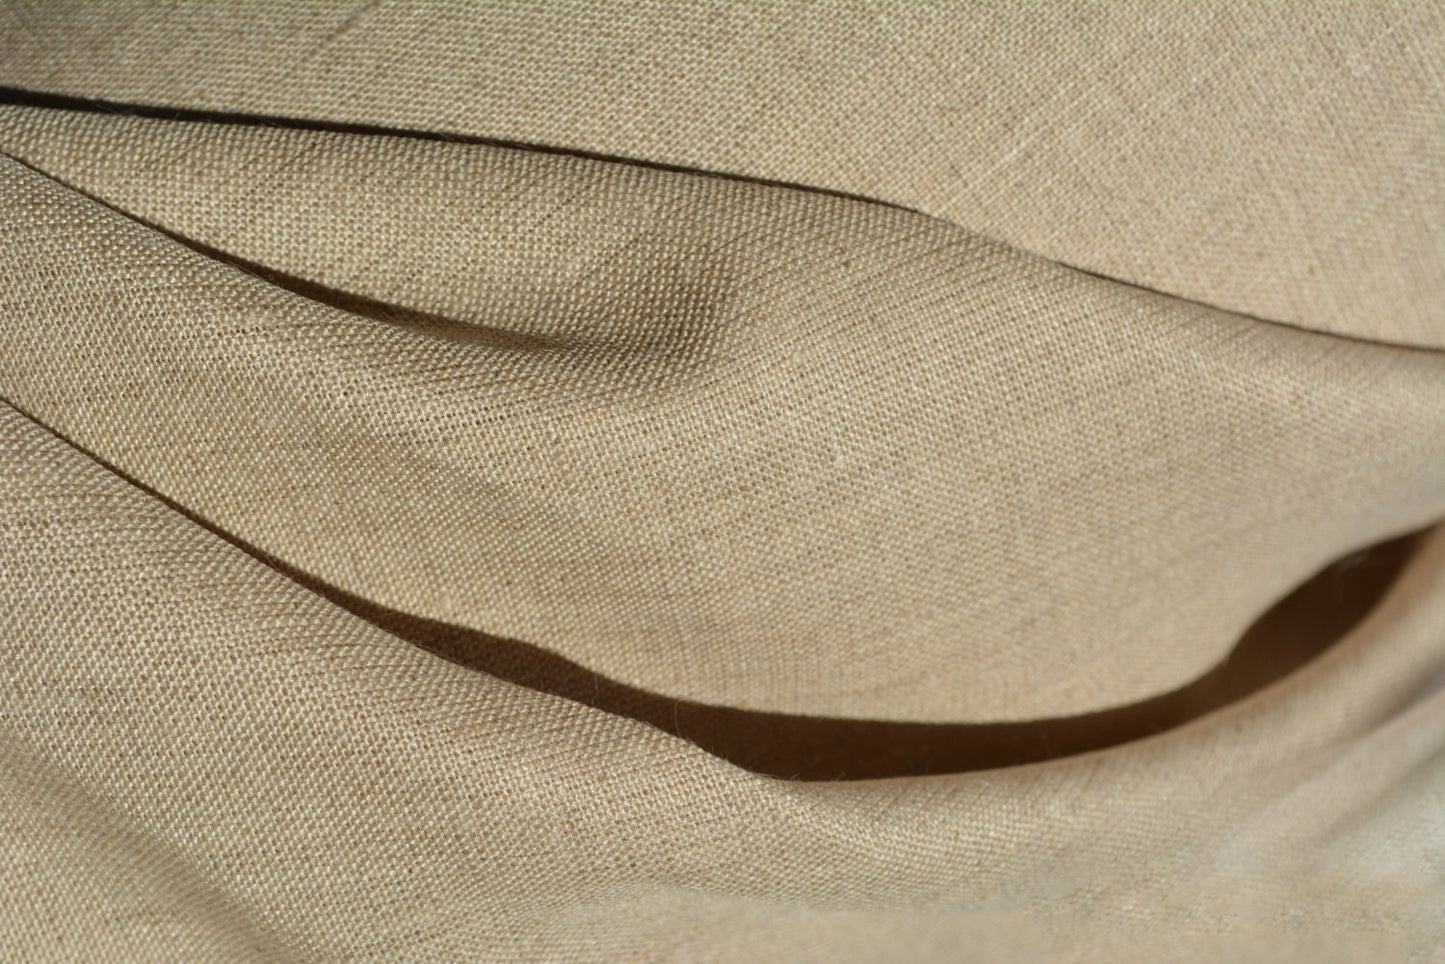 Rovagnati LINO Extra 40 - 100% linen canvas INTERFACING / INTERLINING - finest available - Made in Italy